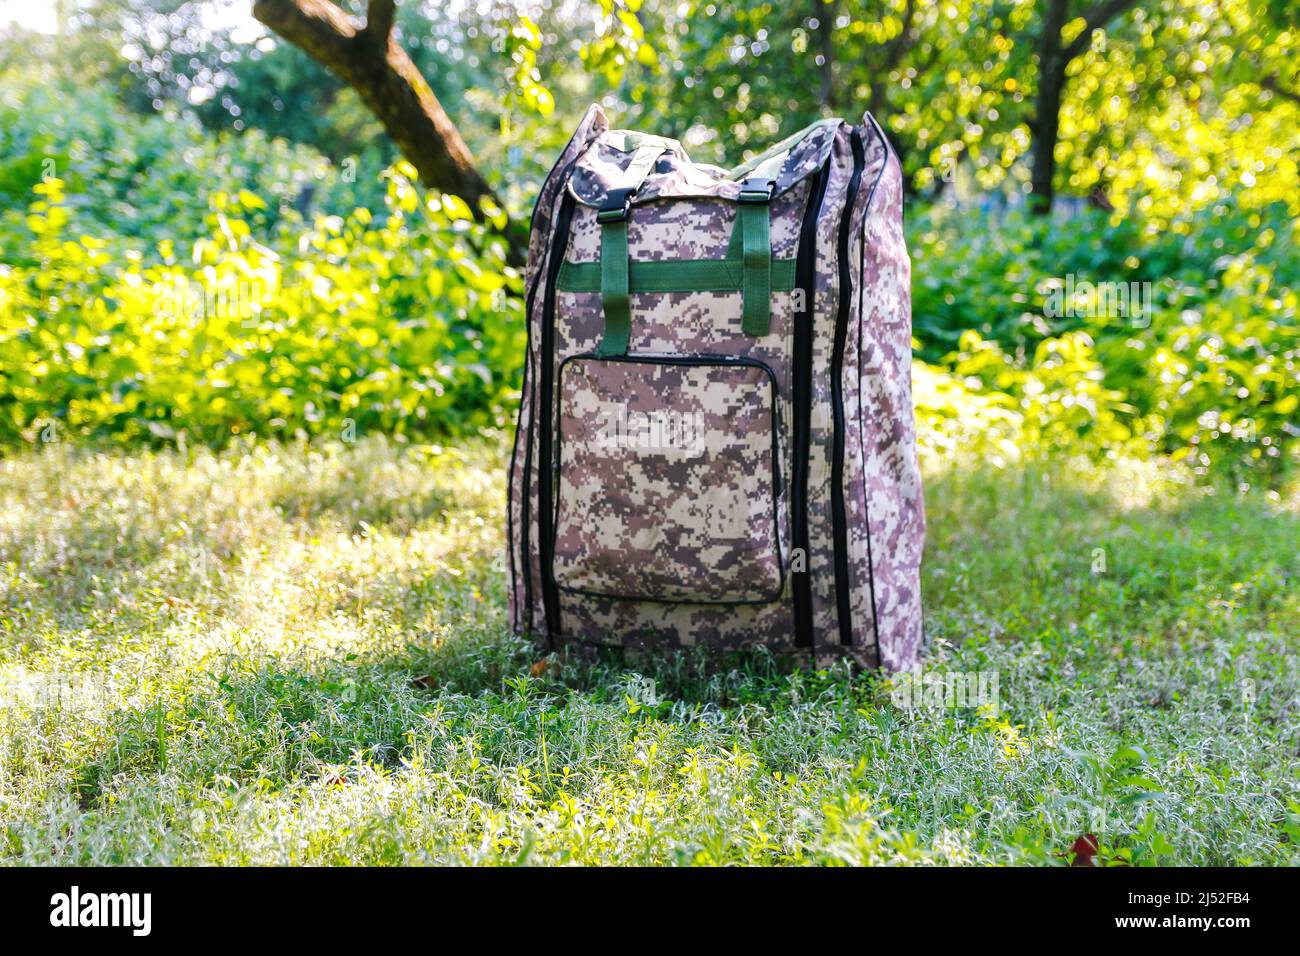 Defocus military backpack. Army bag on green grass background near tree. Military camouflage webbing material on a British army rucksack. Close-up Stock Photo